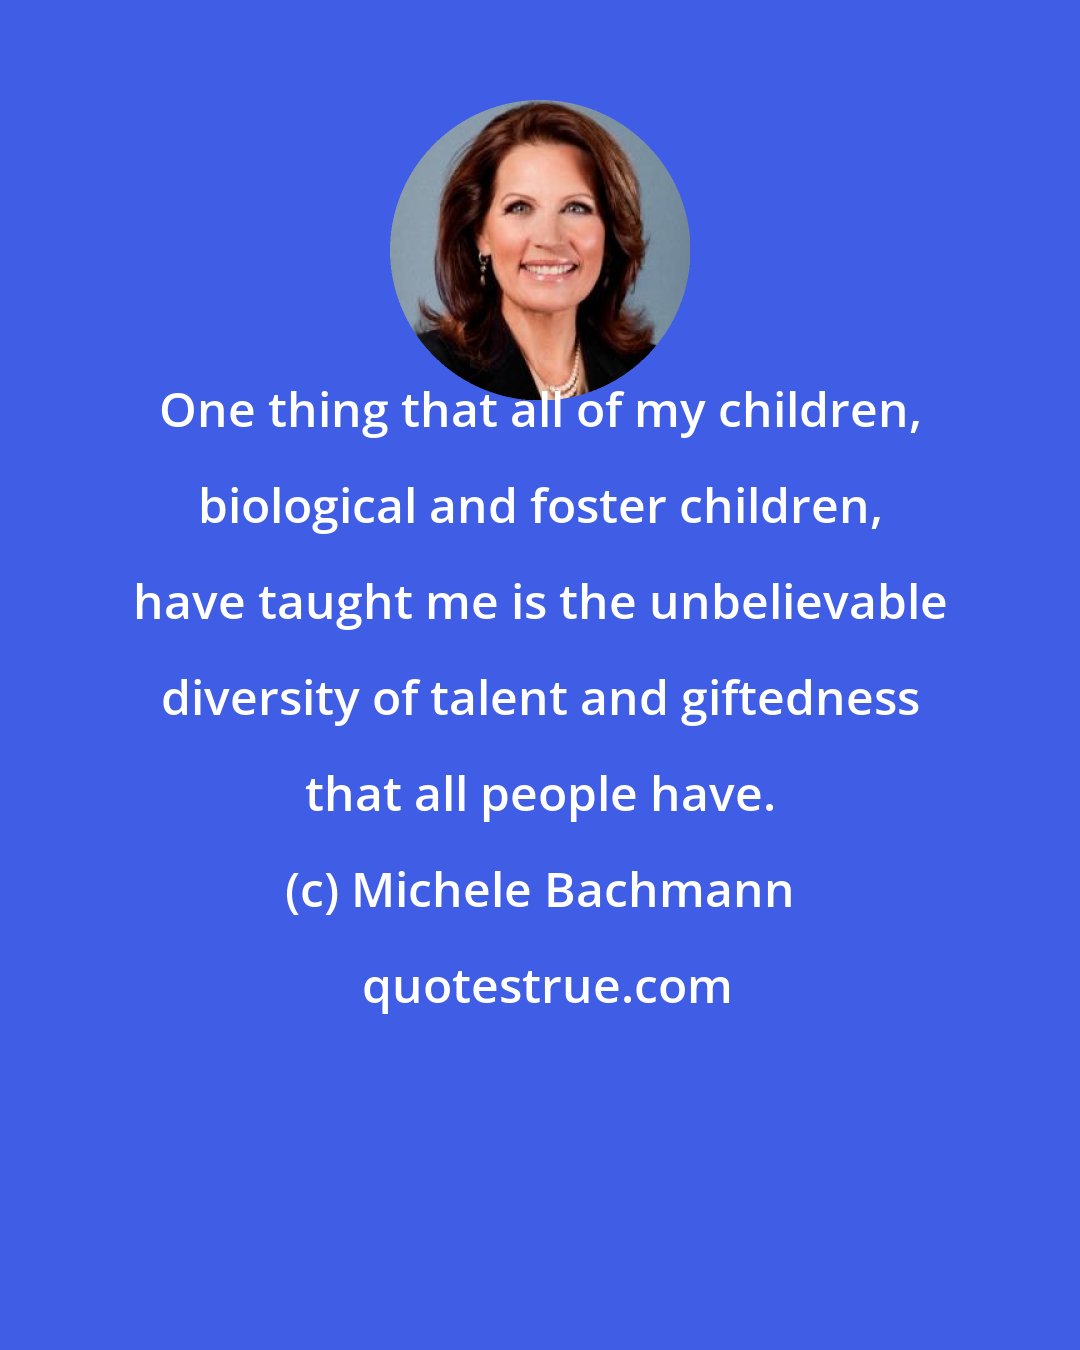 Michele Bachmann: One thing that all of my children, biological and foster children, have taught me is the unbelievable diversity of talent and giftedness that all people have.